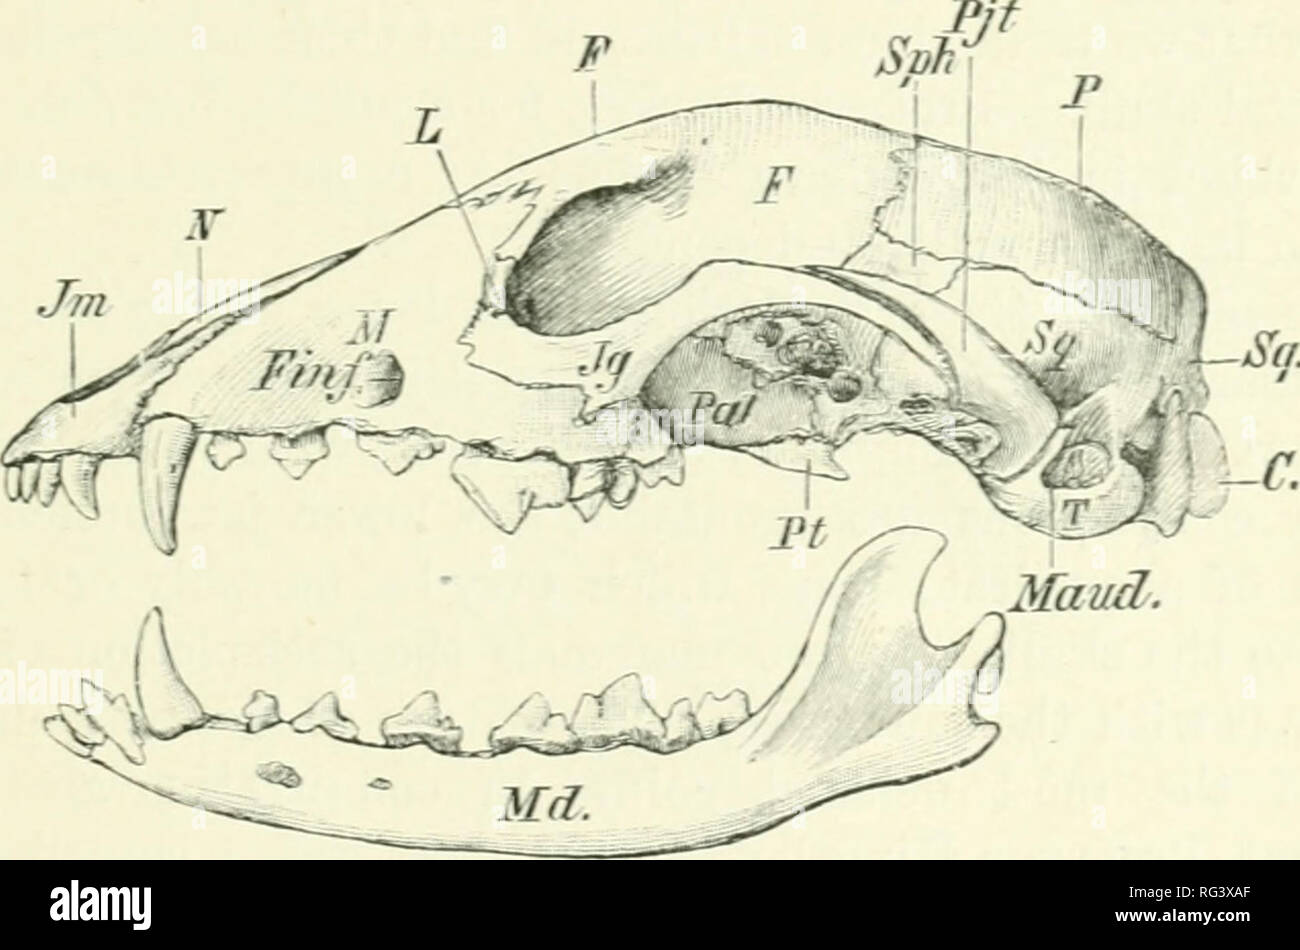 . The Cambridge natural history. Zoology. SKULL OF .^^M^Lâ VL.S AND REl'TILES particularly conspicuous in the Whales and in the Edentates. In the former group the occurrence of the first interceutrum serves to mark the separation of the caudal from the lumbar series. The number of caudals varies from three in Manâand those quite rudimentaryâto nearly fifty in Manis macrura and Micro- gale Ji&gt;nilirii inh'fn. The Skull.âThe skull in the Mammalia difiers from that of the lower Yertebrata in a number of important features, which will be enumerated in the follo^vin(T brief sketch uf its structu Stock Photo